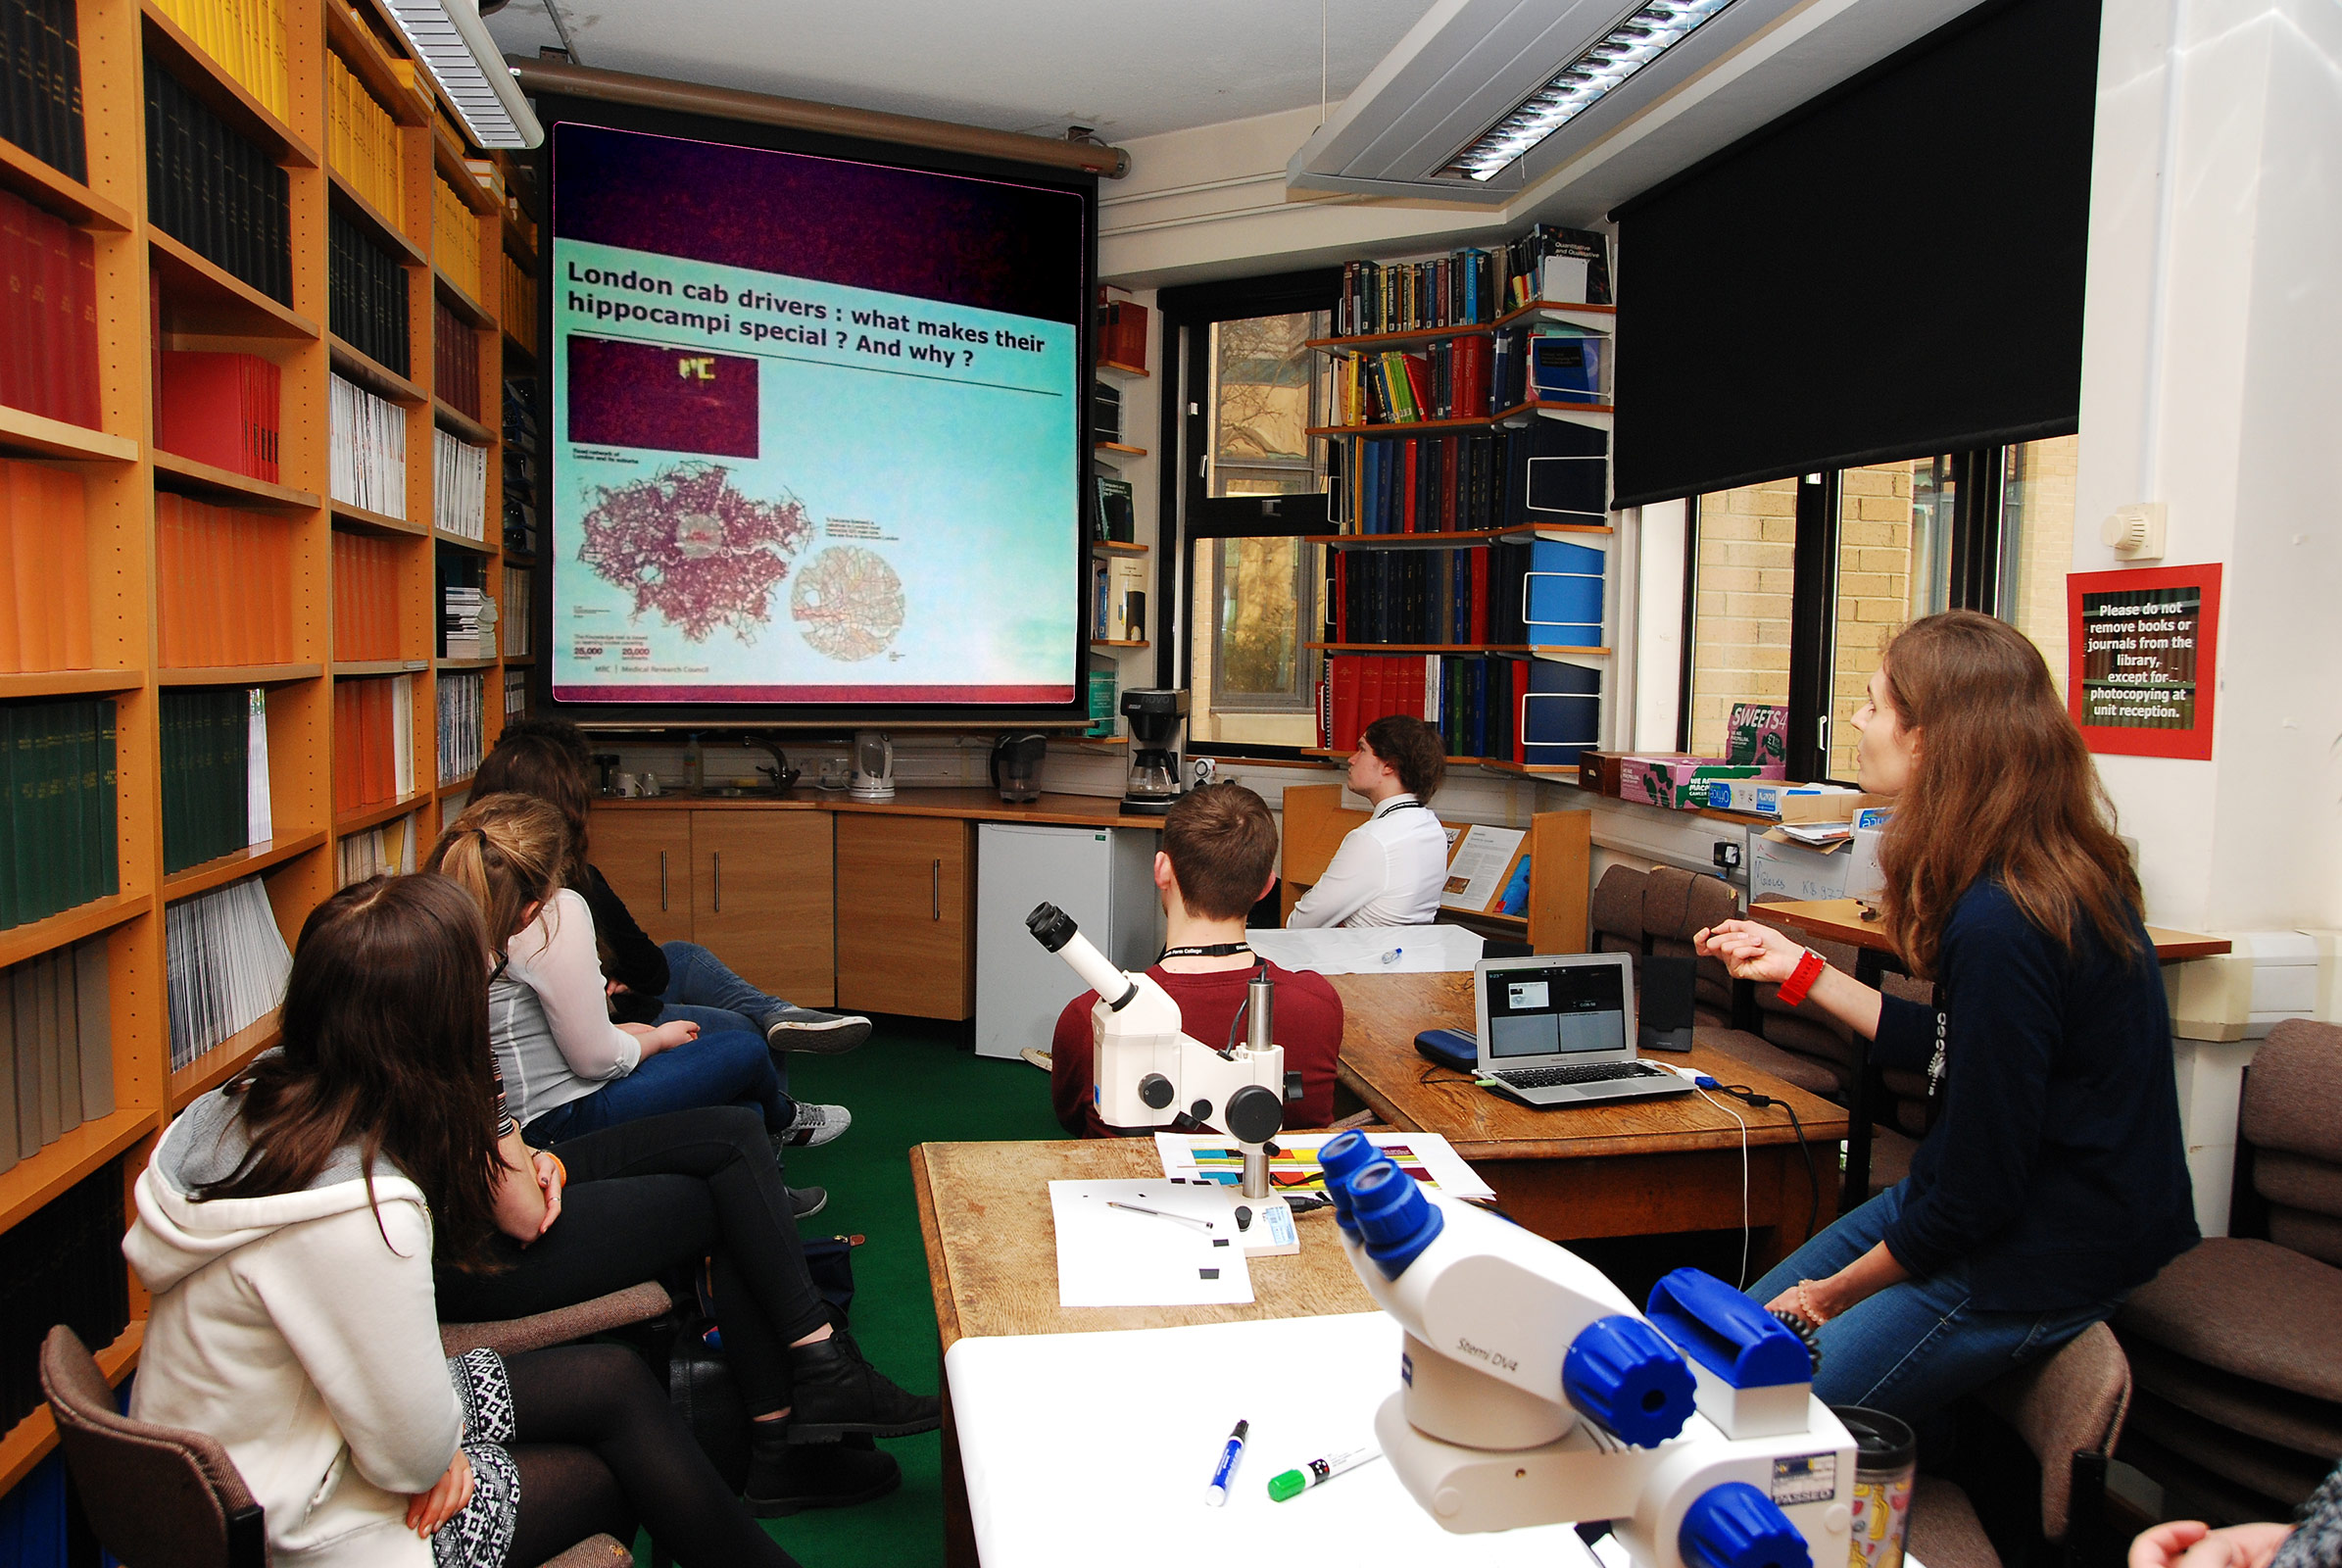 Unit scientist Dr Stephanie Trouche gives visiting pupils a virtual tour of some brain circuits underlying memory.